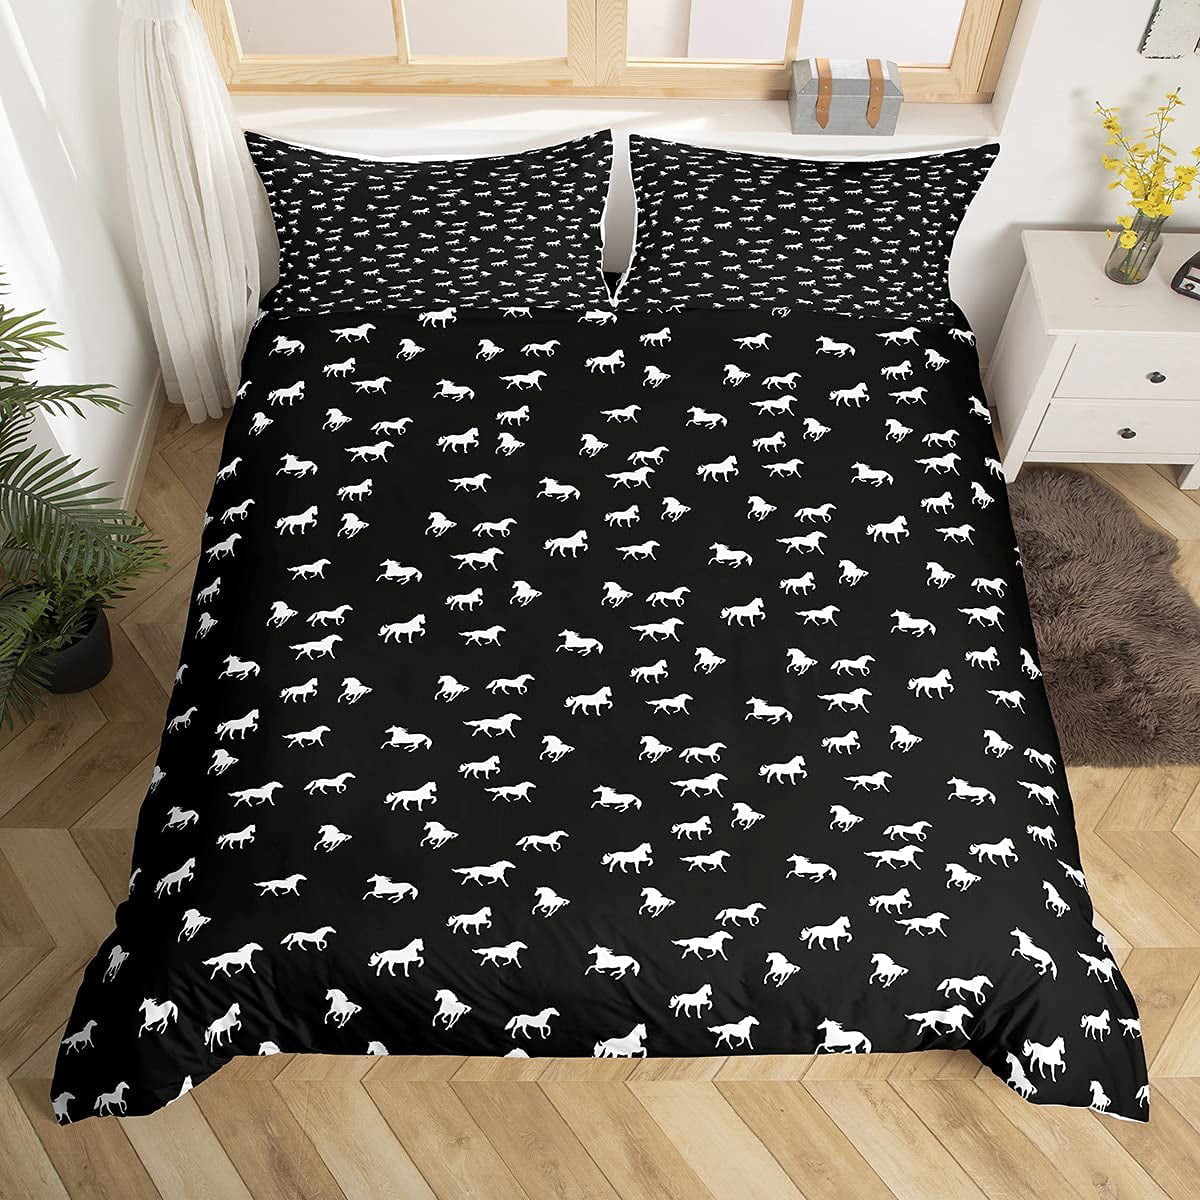 Cat, Twin Cat Kids Duvet Cover Twin Cute Flowers Printed Duvet Comforter Cover with 1 Pillowcase Soft and Lightweight Kids Bedding Set 